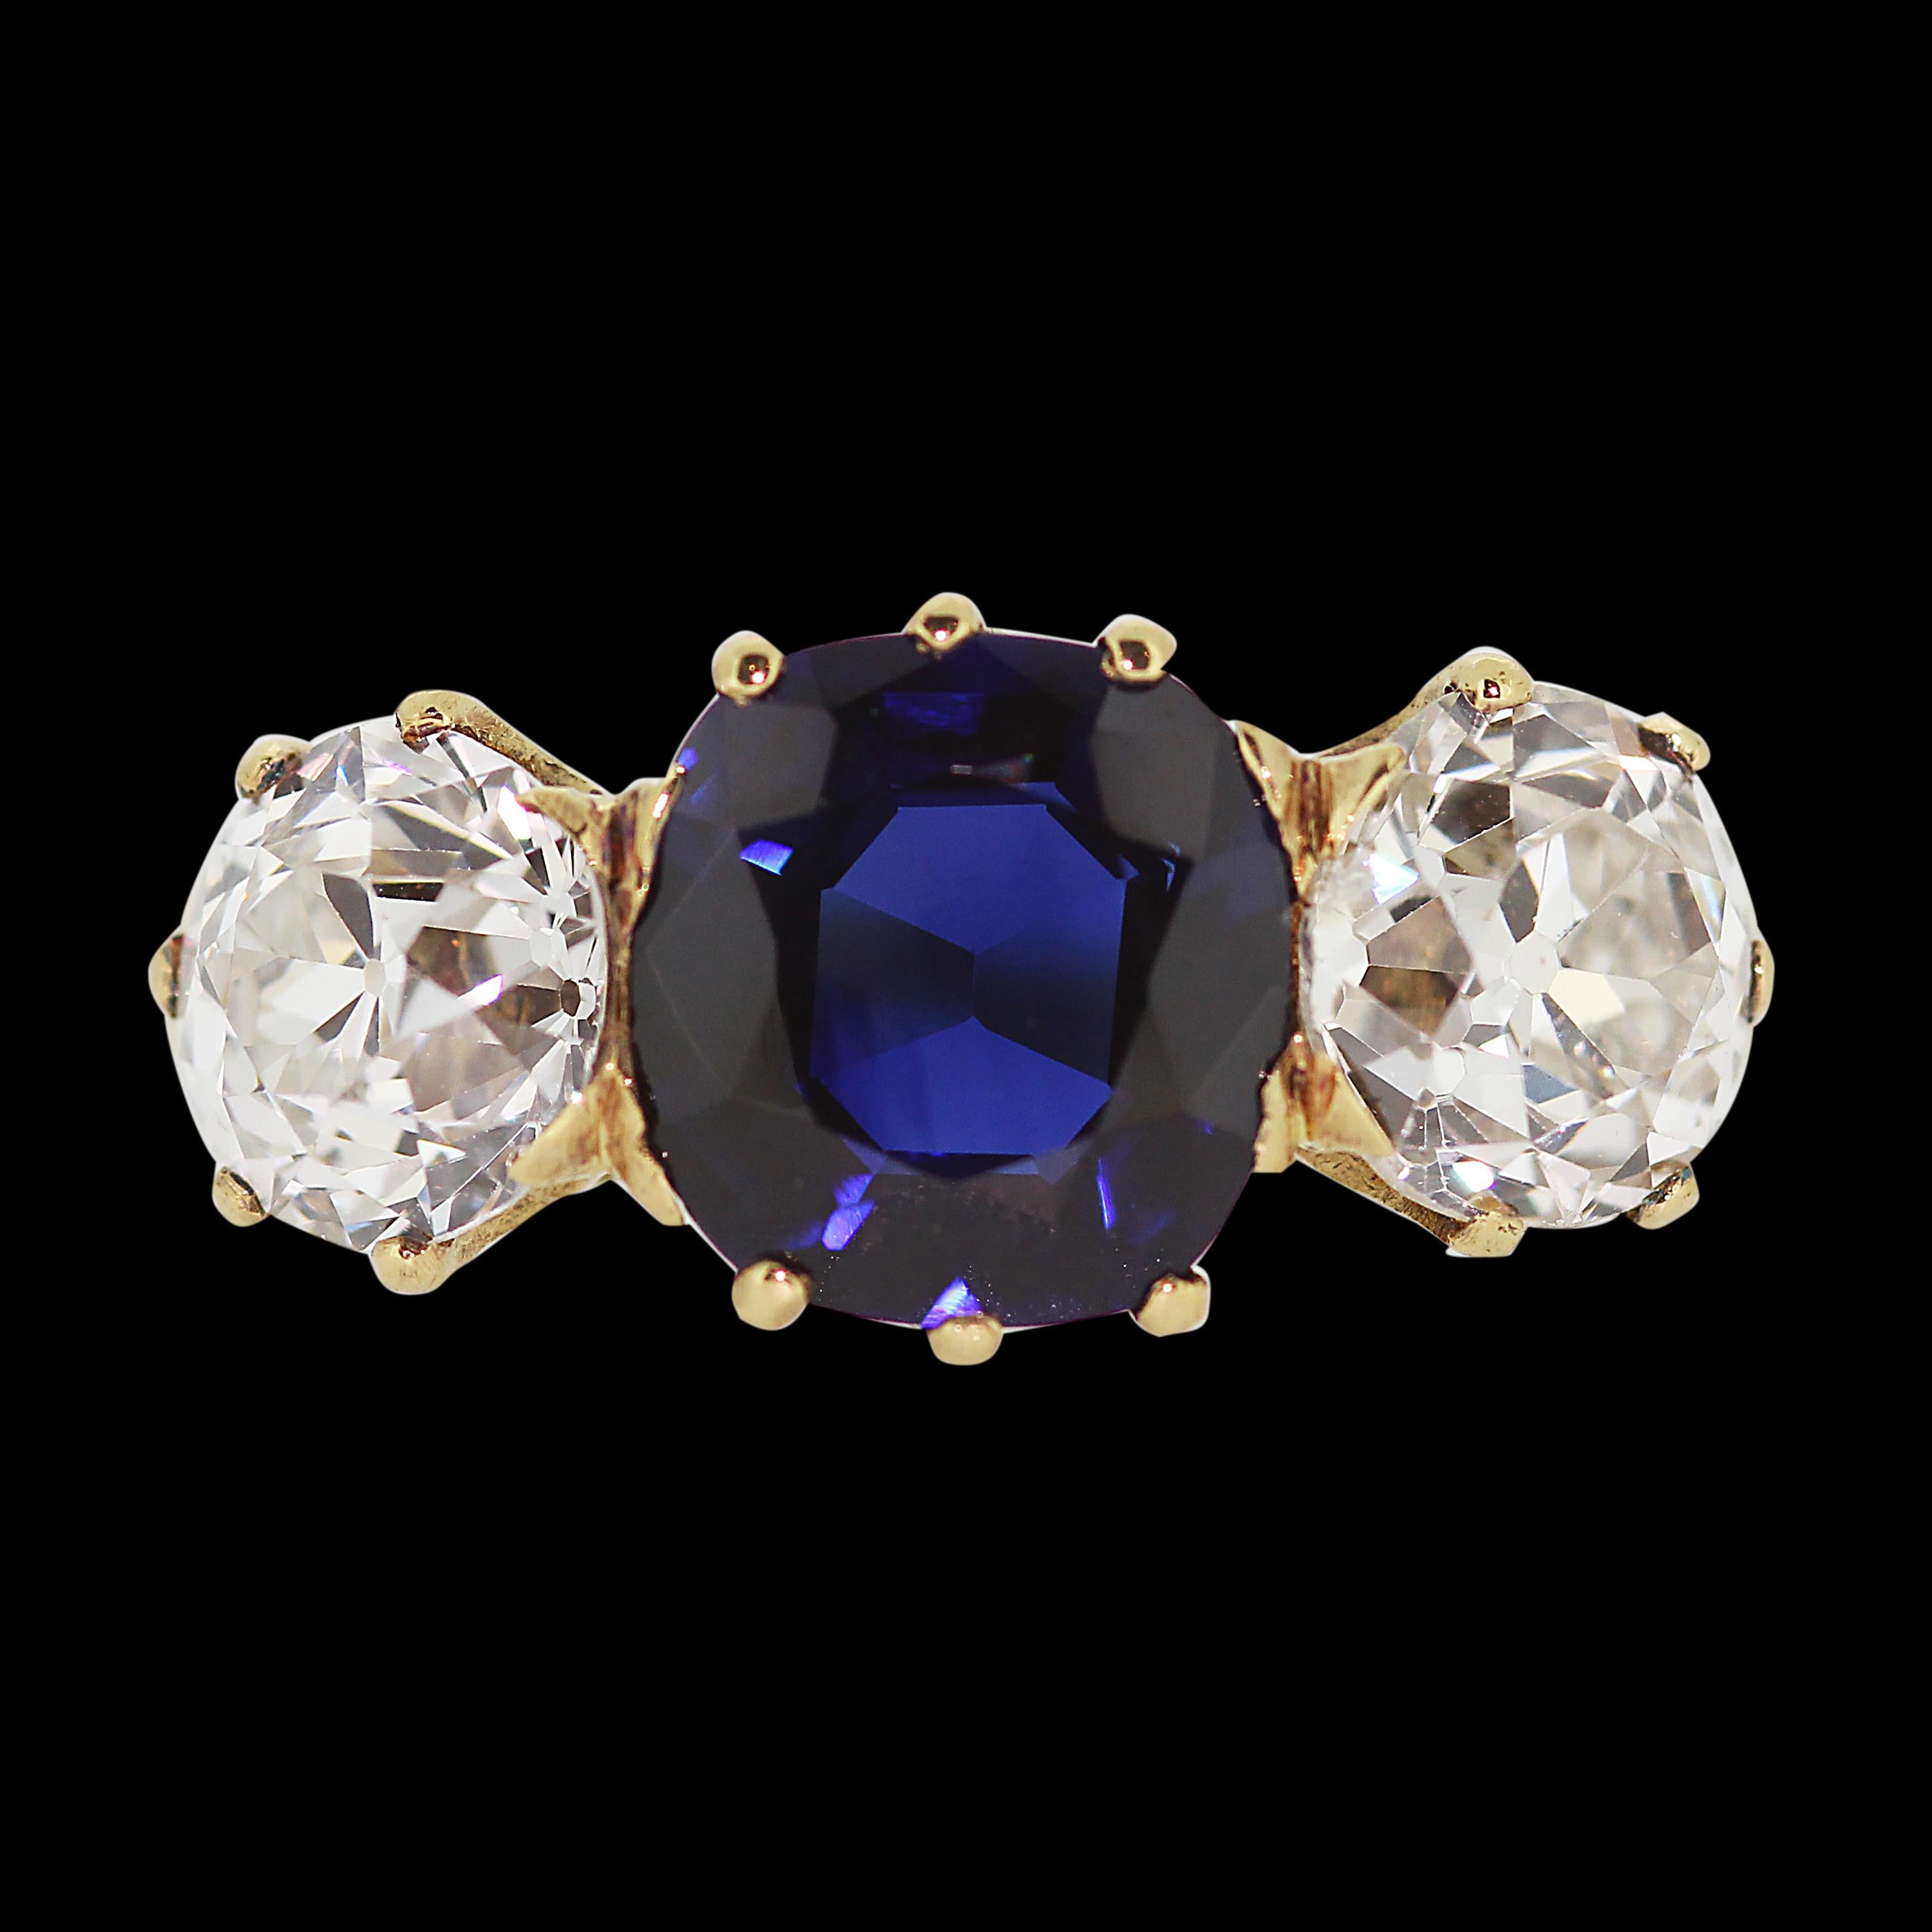 Victorian beautiful sapphire and diamond 3 stone ring in original antique mount. Cushion cut sapphire is natural untreated with certificate, medium blue colour with weight 2.77 carats. 
2 old cut diamonds on both sides and total estimated diamond